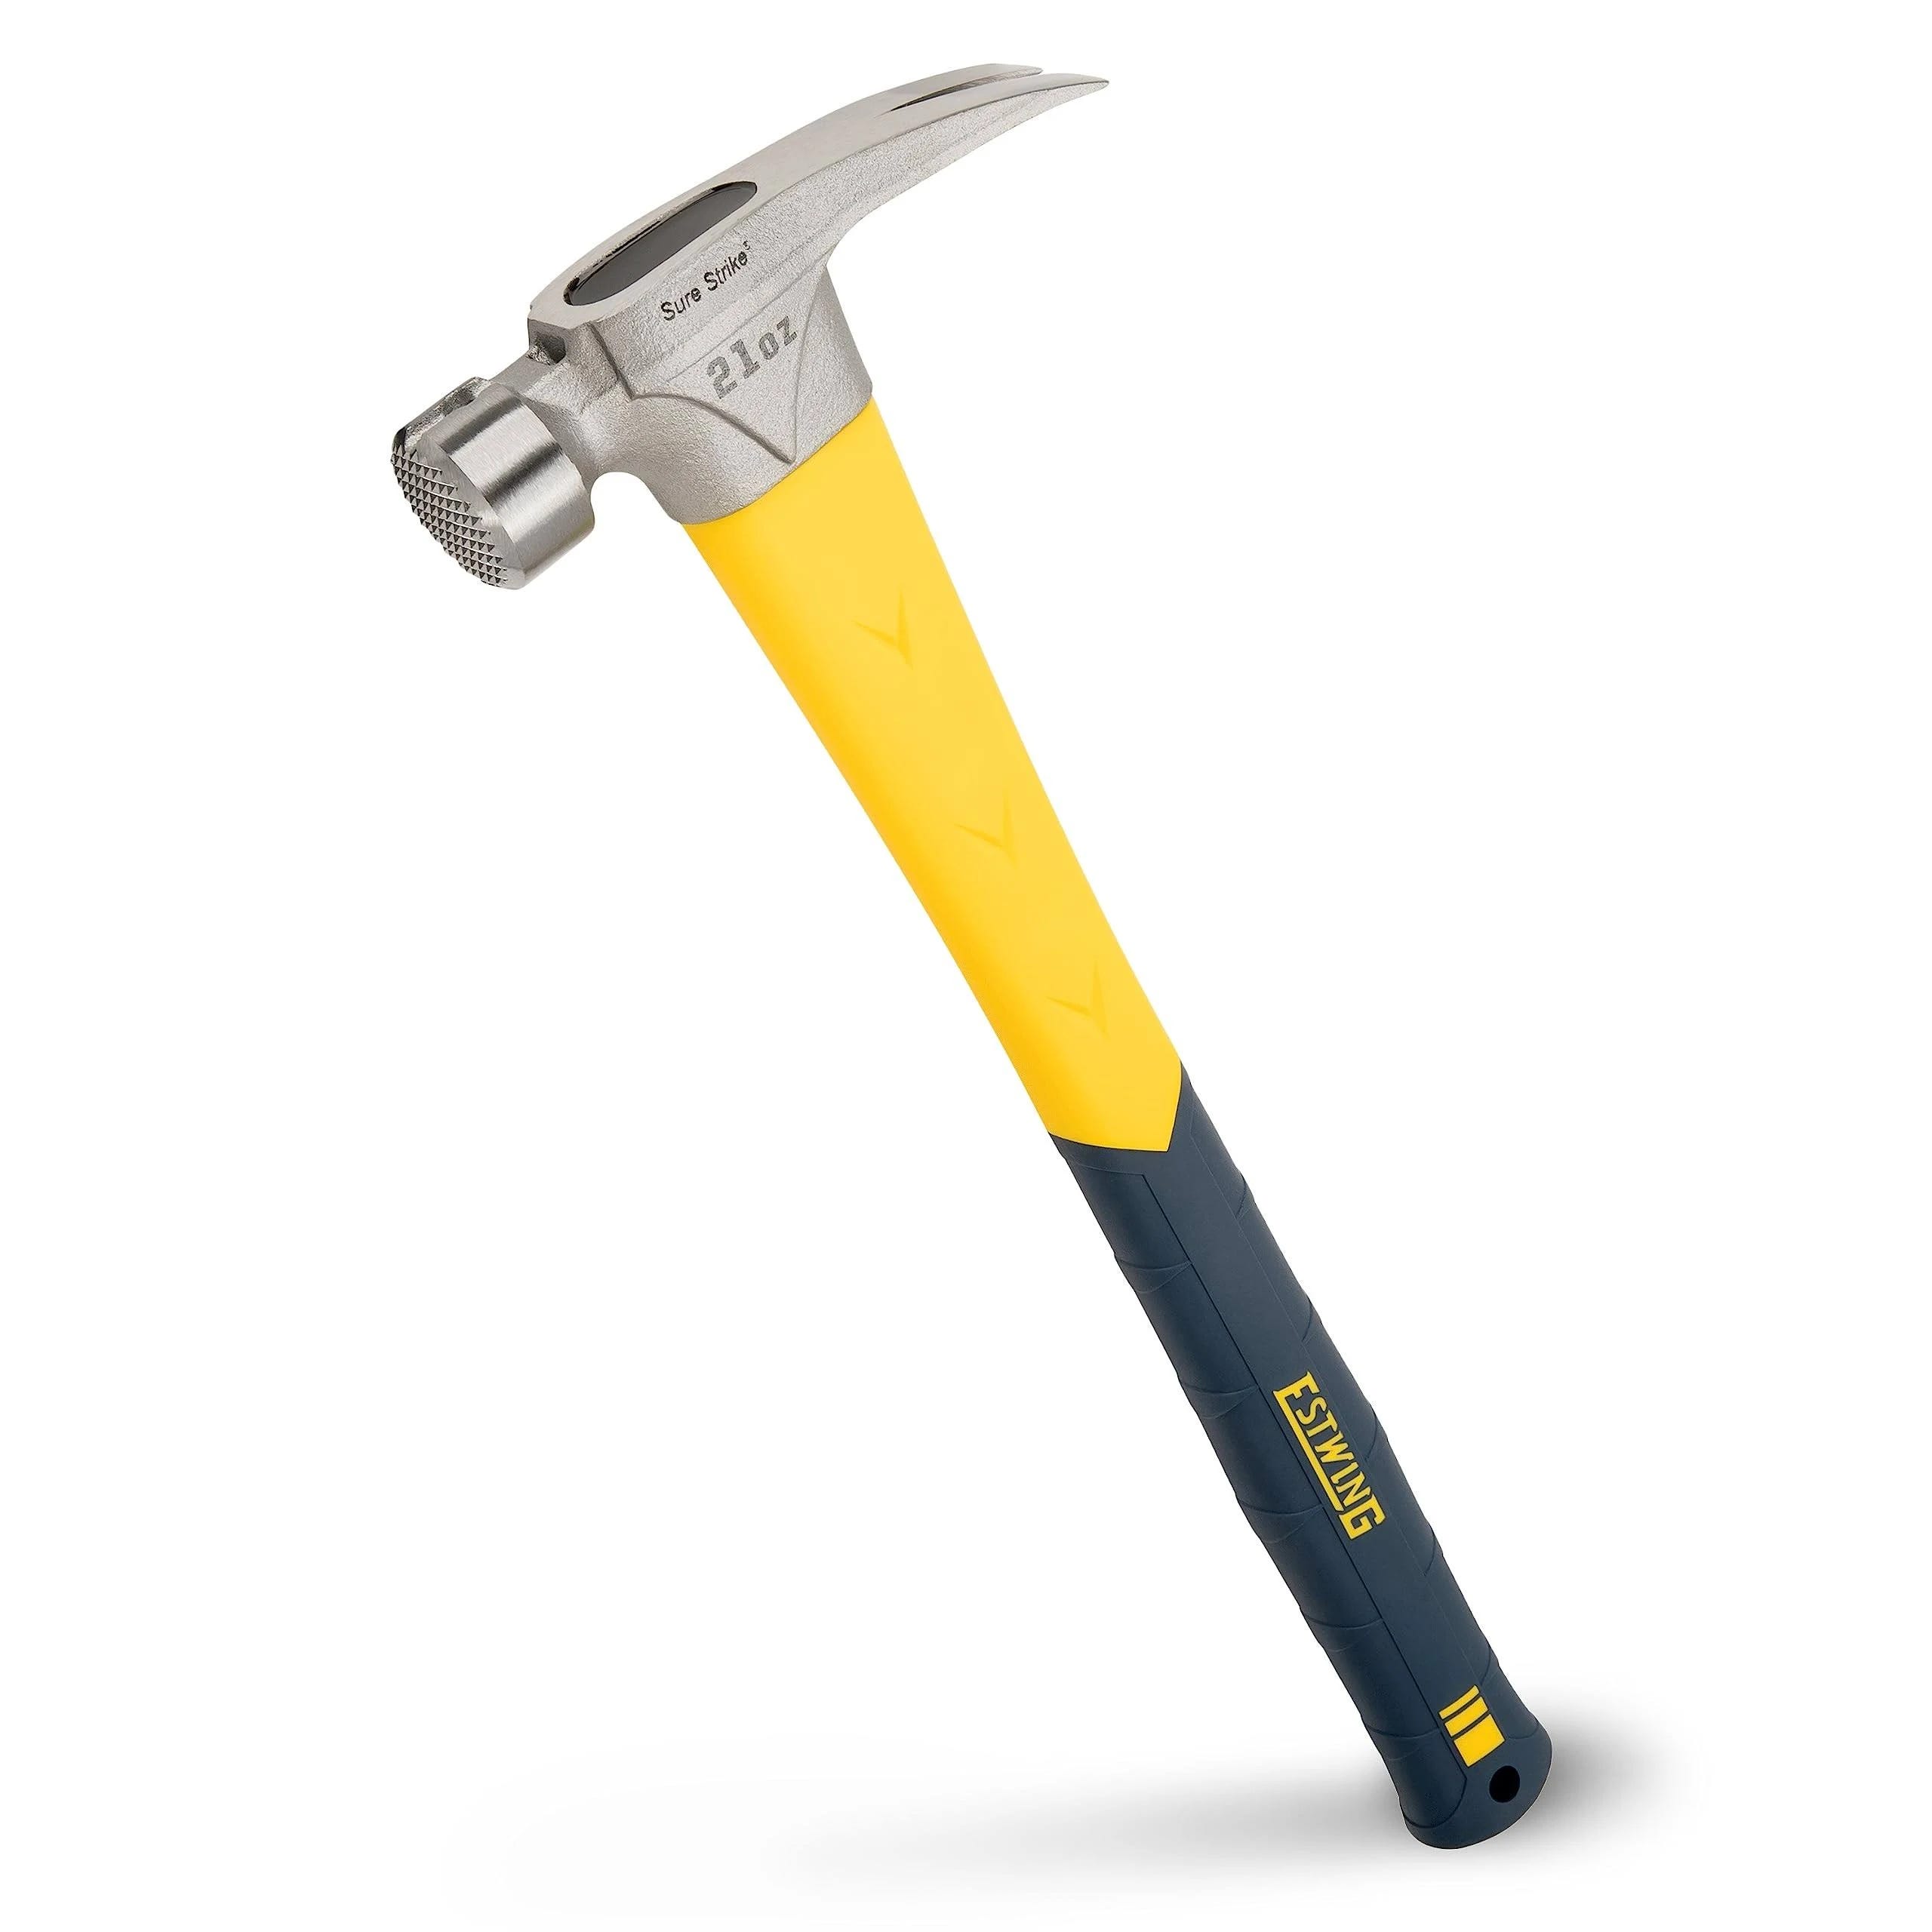 Estwing Milled Face Framing Hammer - Durable and Powerful Roofing Tool | Image